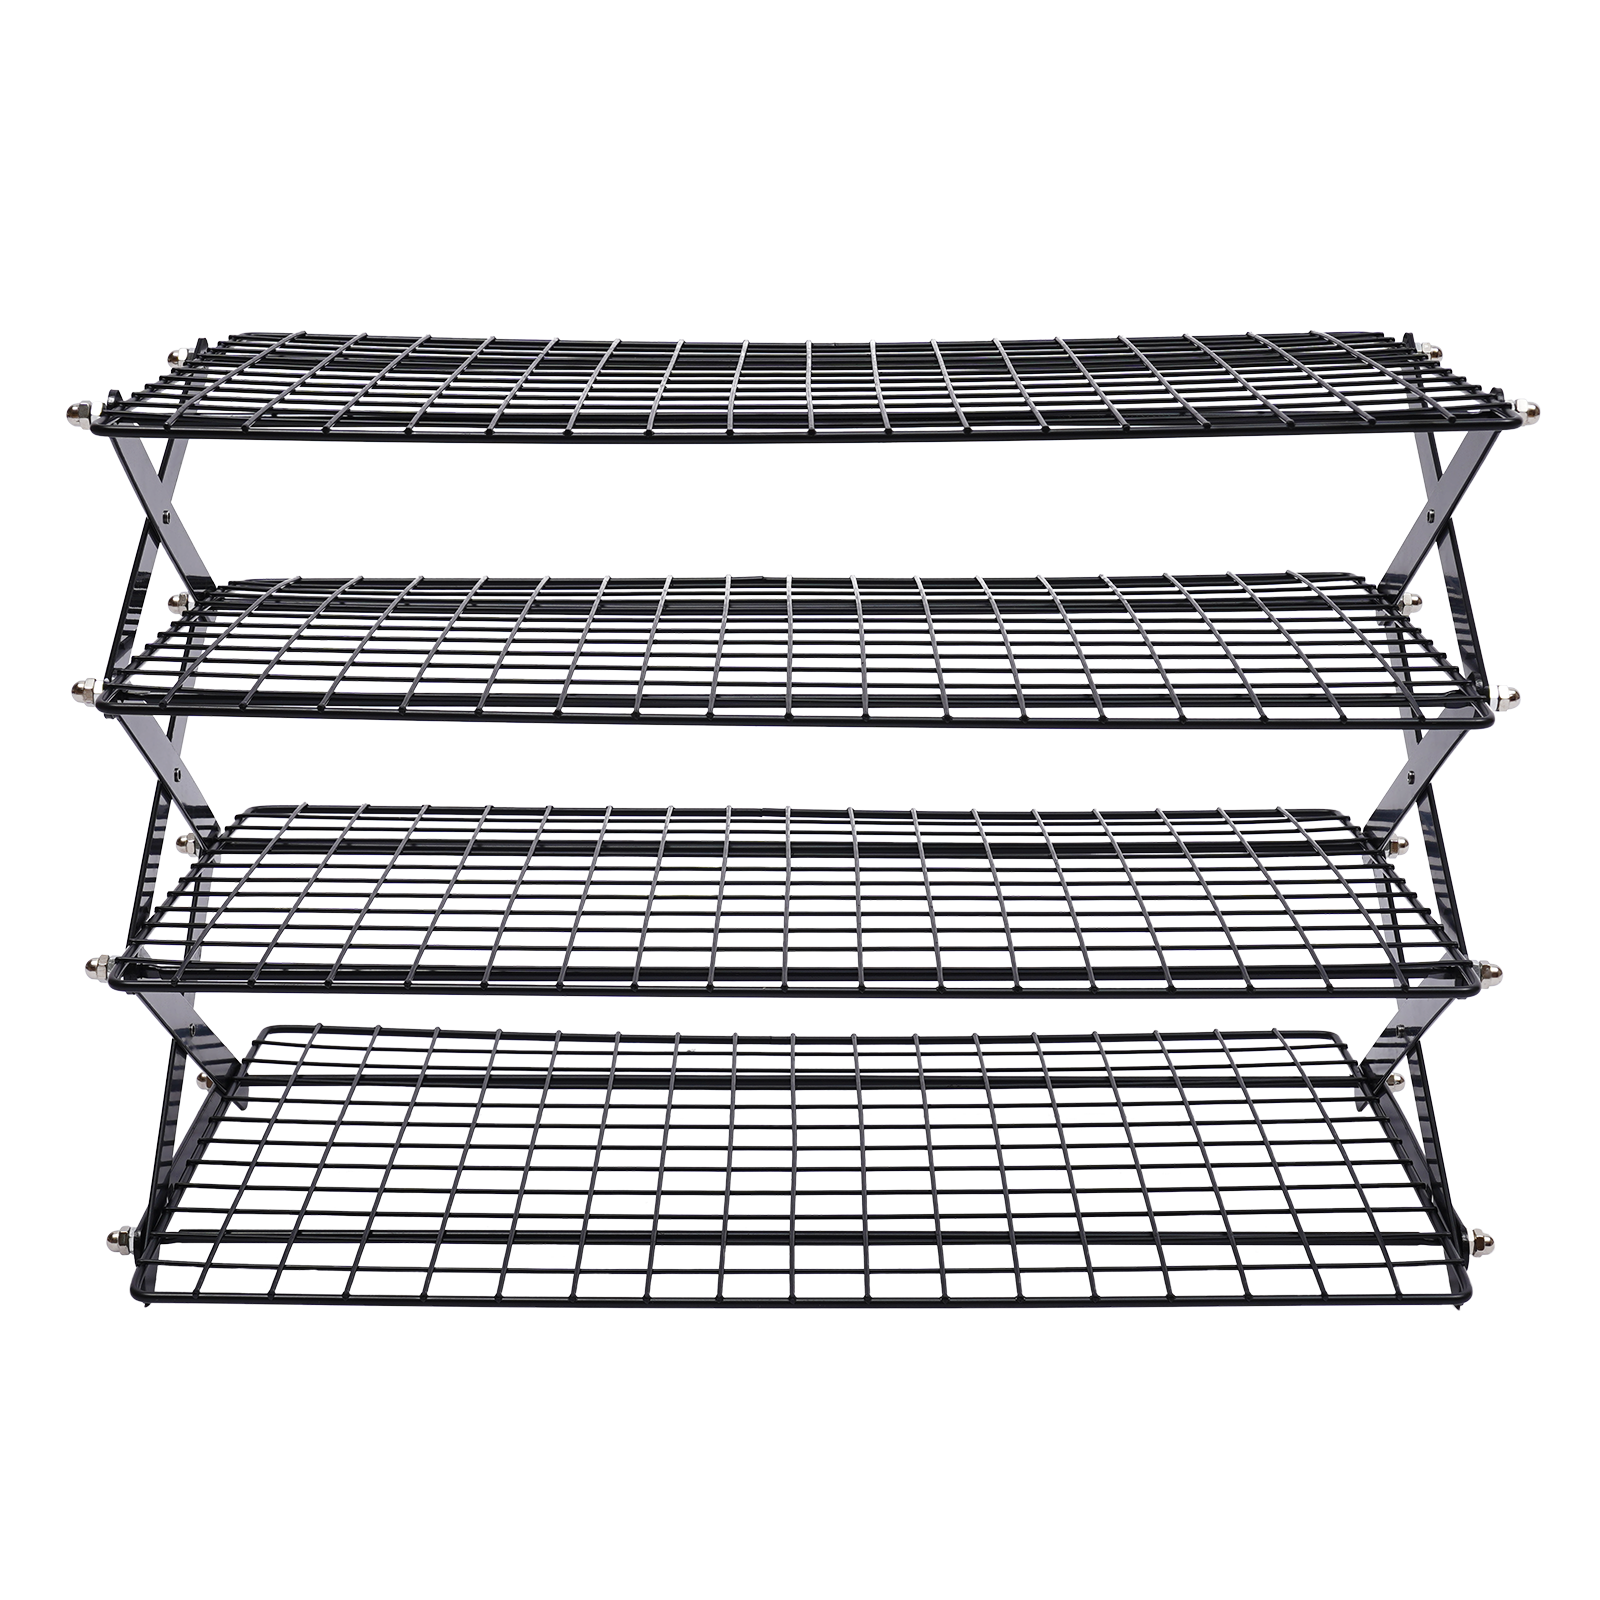 Camping Kitchen Table Picnic Cabinet Folding Cooking Storage Rack Portable Black 4 Layer Outdoor Lightweight Folding Camping Table Picnic Grill Stand Rack Iron Portable Camping Picnic Table Rack - image 1 of 3